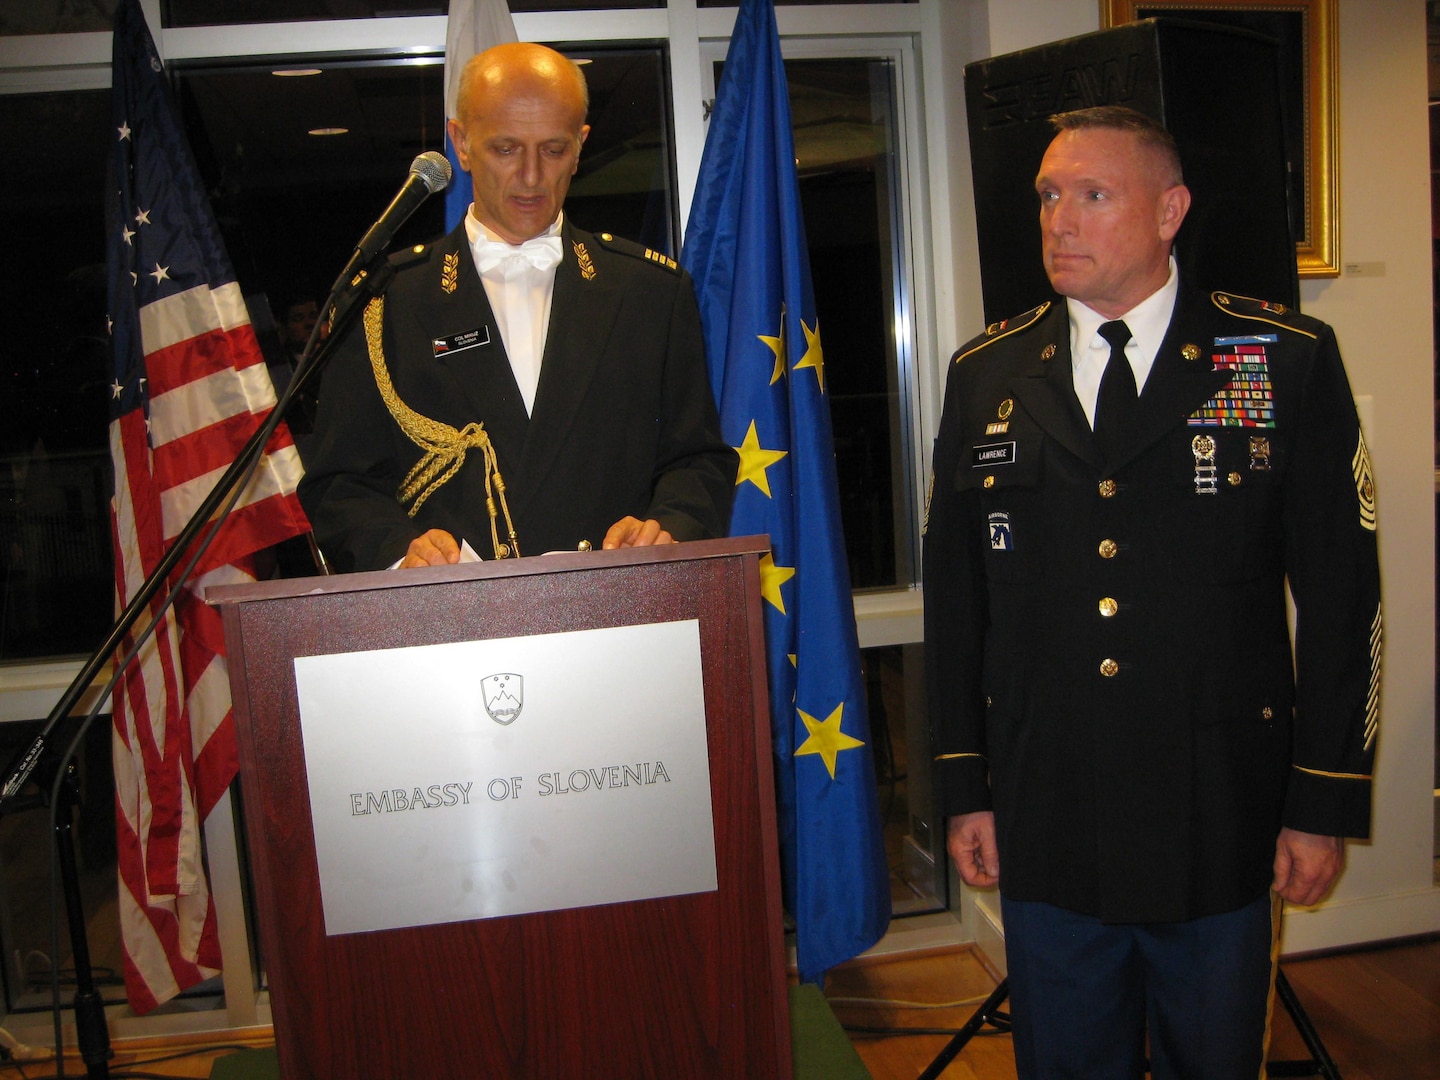 Slovenian Defense Attache Col.  Ivan Mikuz awards Colorado National Guard Senior Enlisted Leader Command Sgt. Maj. Michael R. Lawrence the medal for multinational cooperation at the Embassy of the Republic of Slovenia June 23, 2015.  Lawrence has spent two decades helping build the partnership between Slovenia and Colorado as part of the National Guard State Partnership Program. 